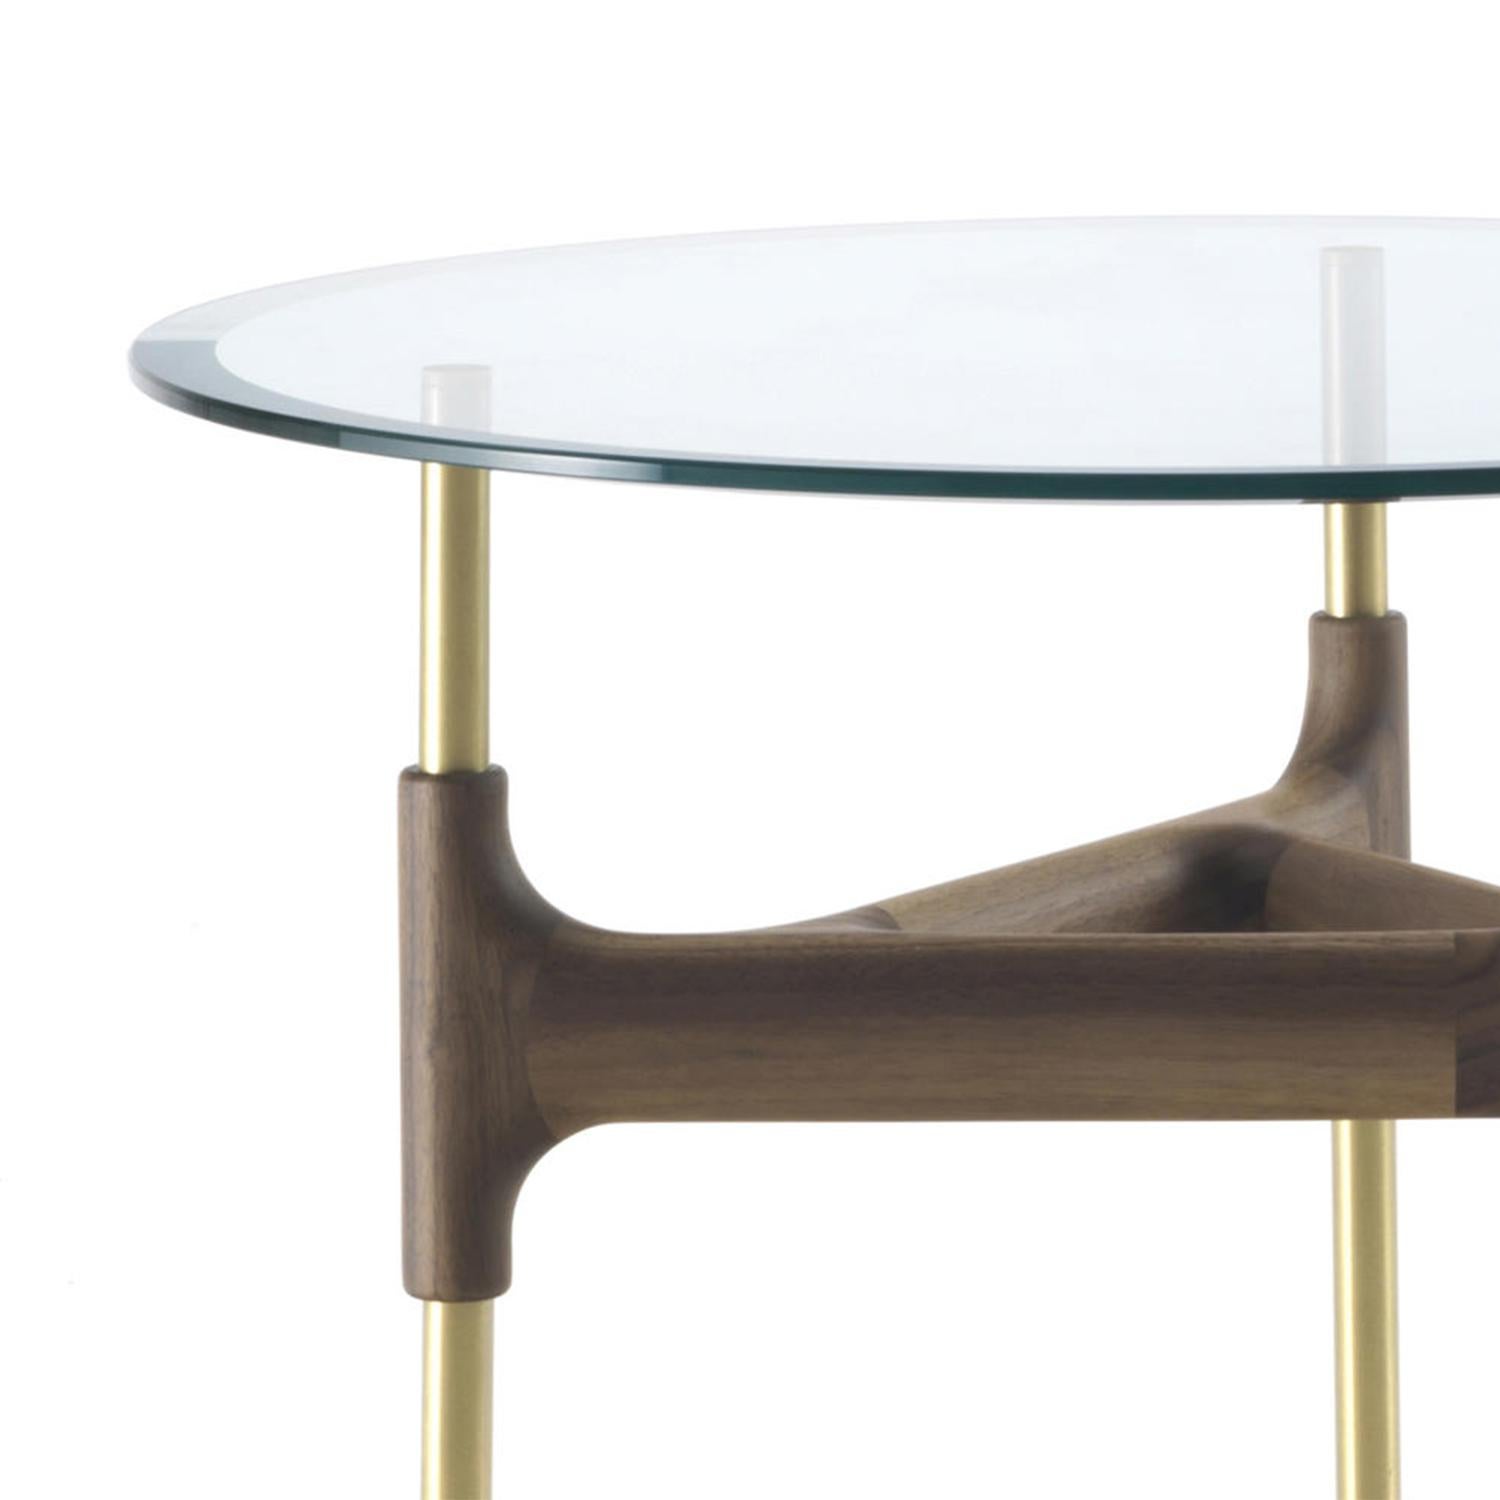 Side table paloma glass with hand-crafted
solid walnut base with steel feet in brass finish.
With bevelled tempered clear glass top, 12mm
thickness.